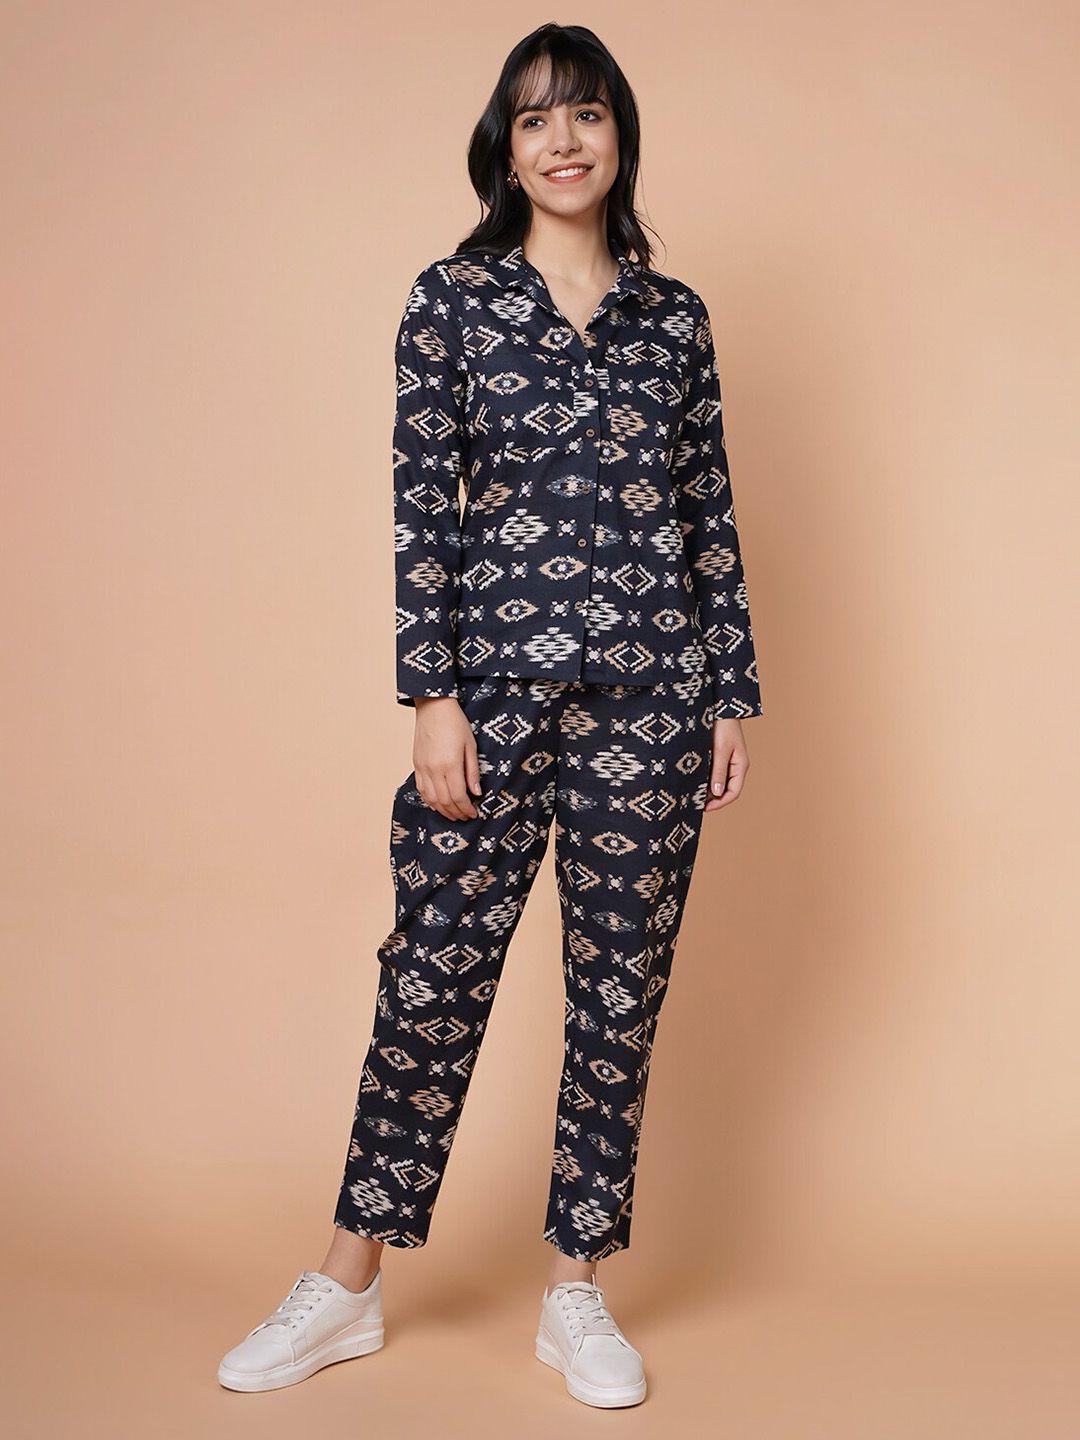 house-of-s-women-black-&-white-printed-night-suit